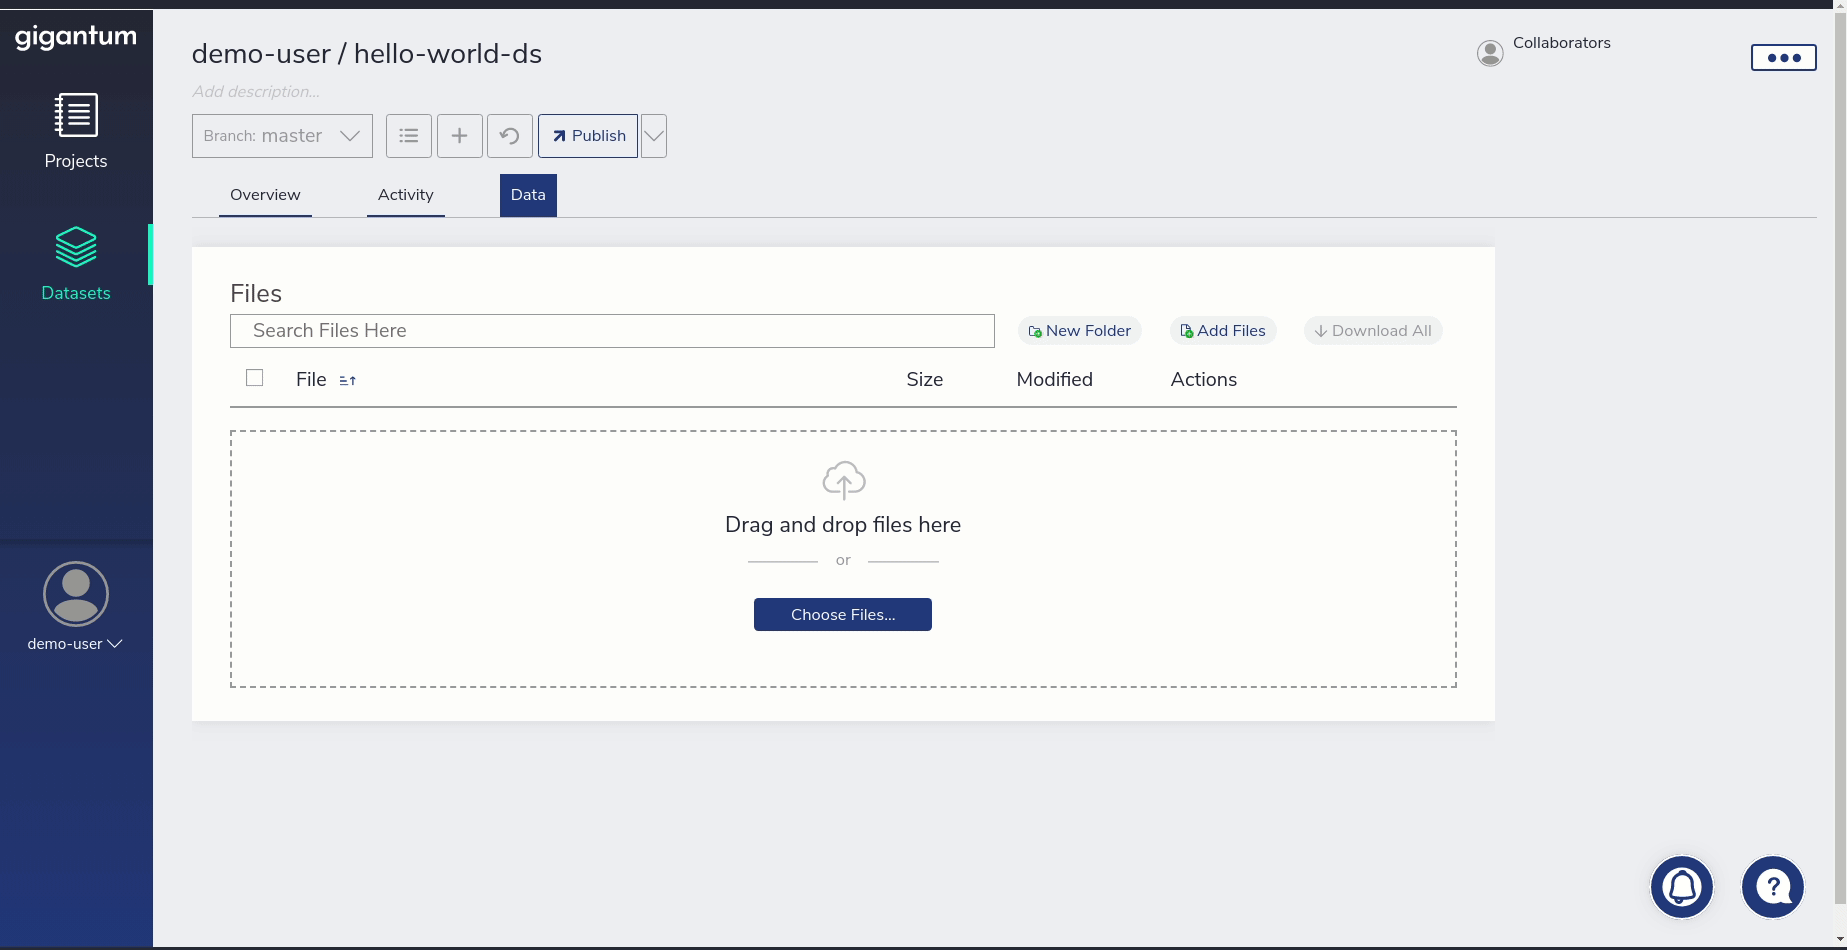 Uploading file with drag and drop